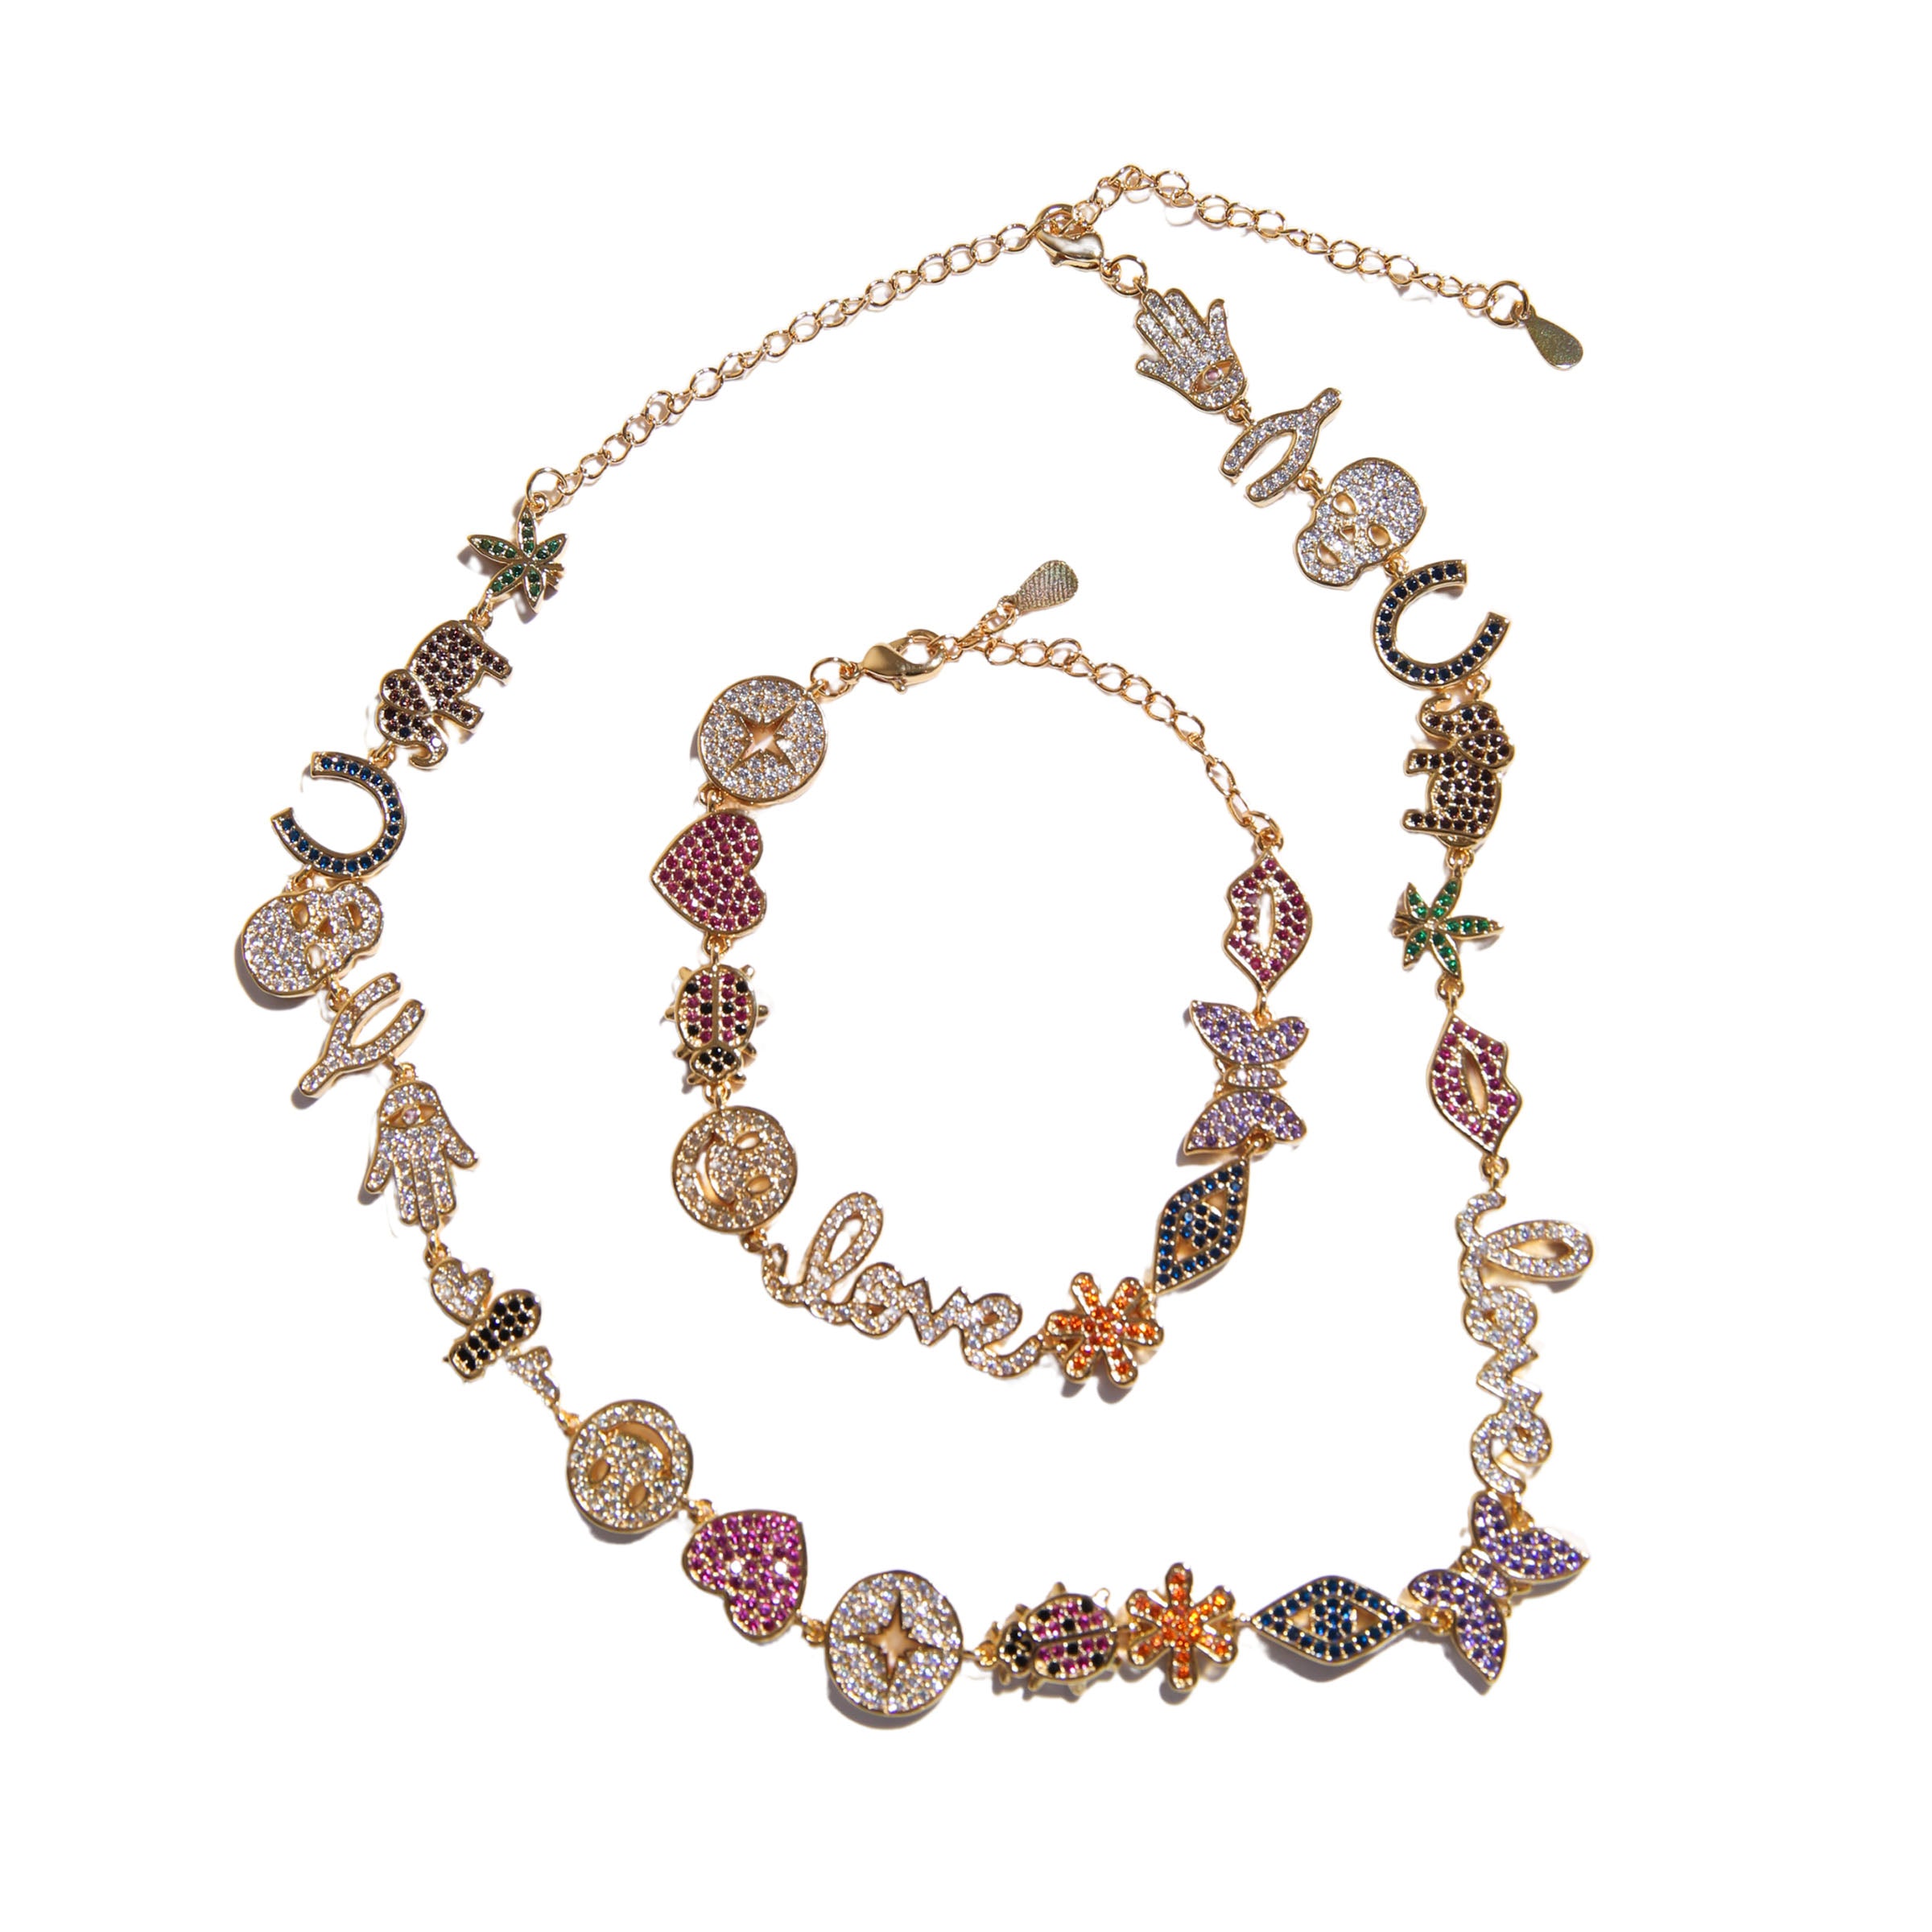 A Few of My Favorite Things Multi Charm Necklace and Bracelet Set